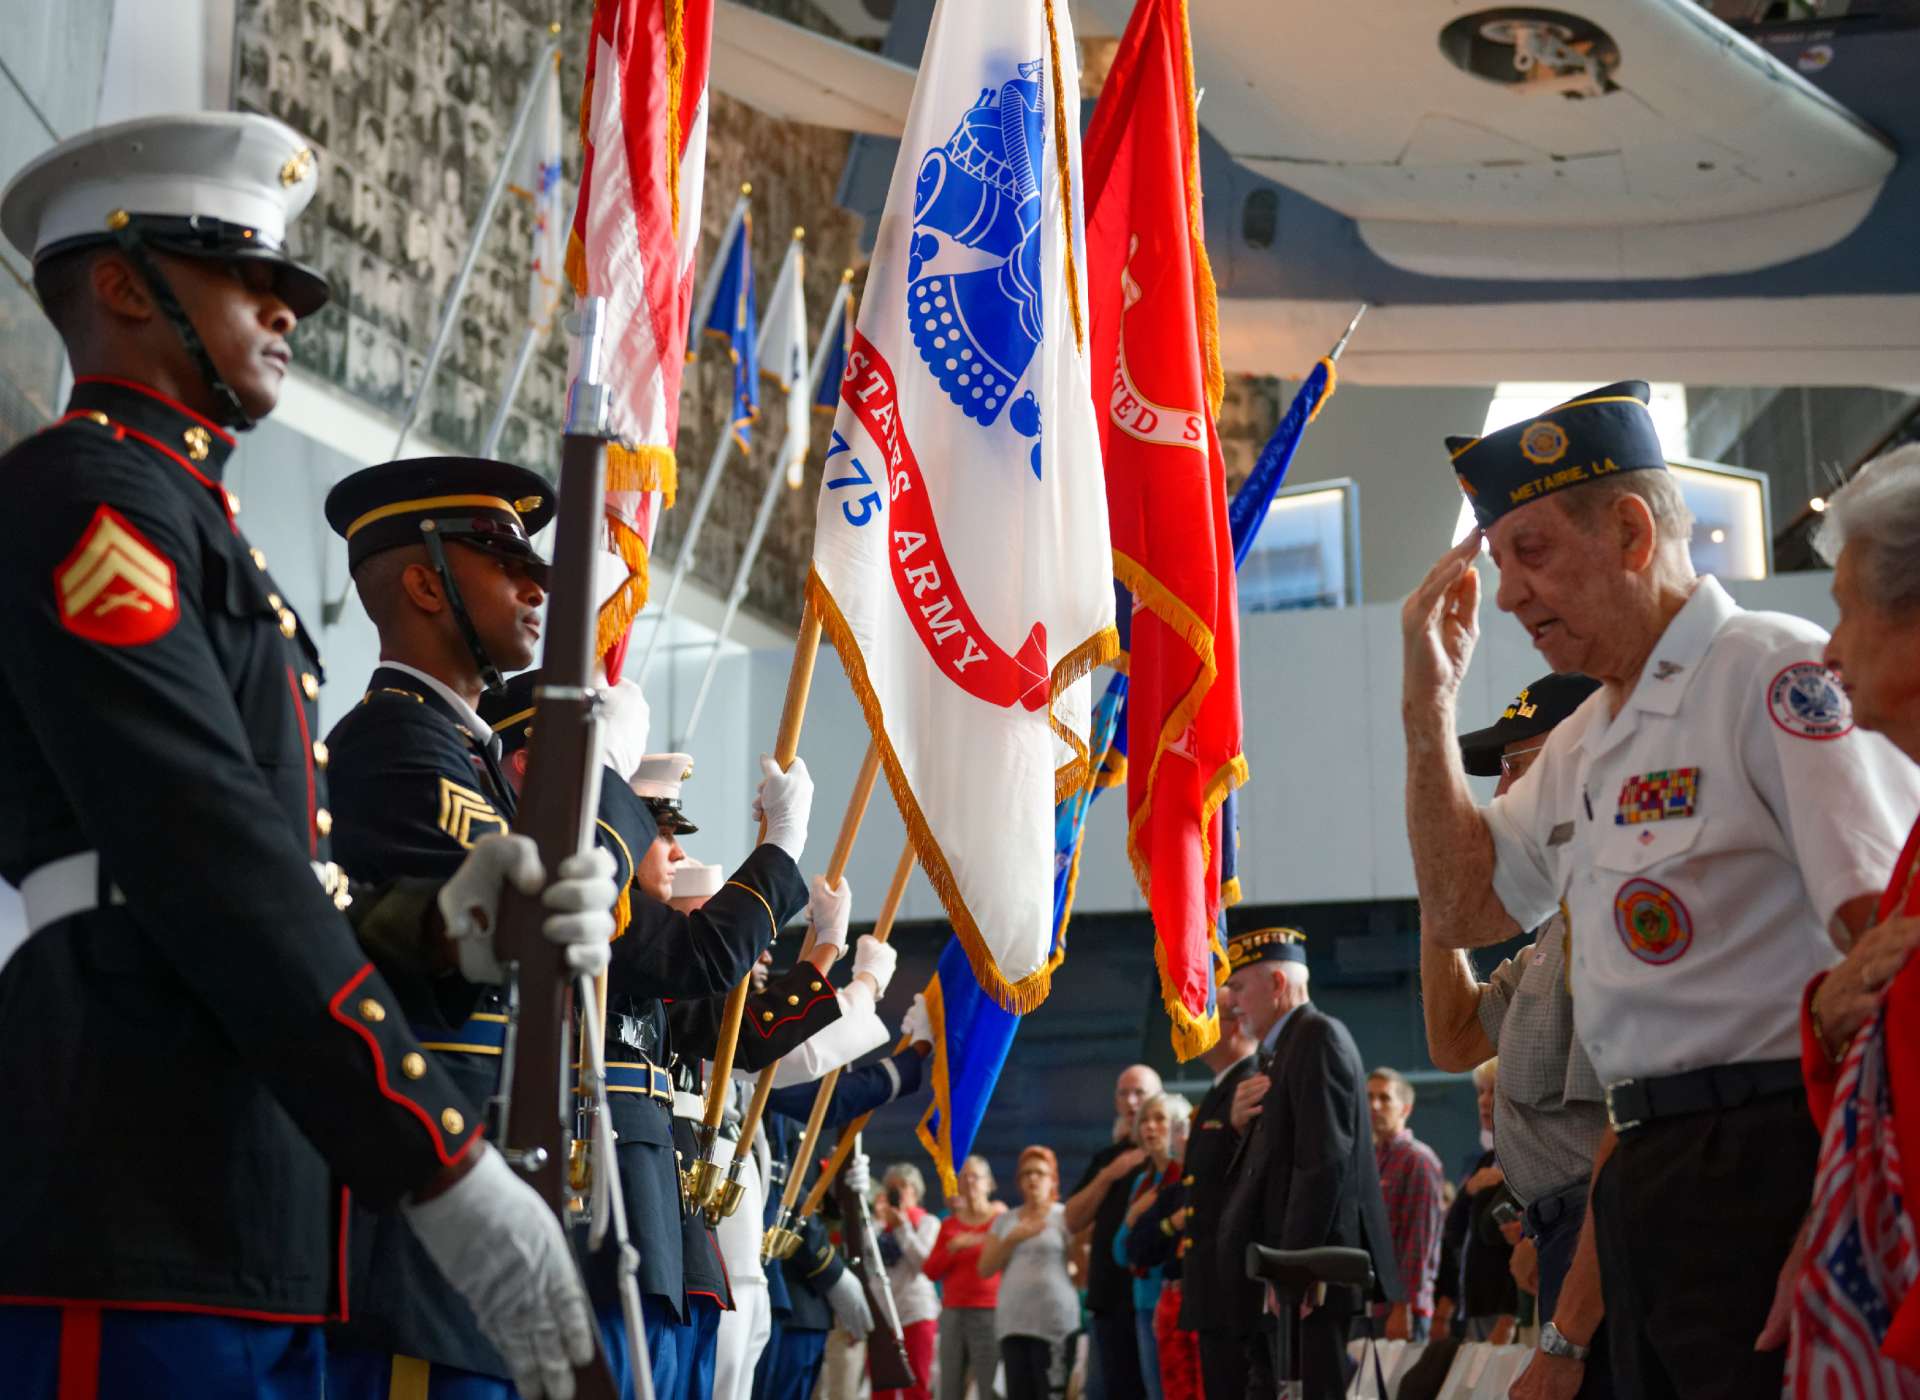 Salute at a military reunion at The National WWII Museum